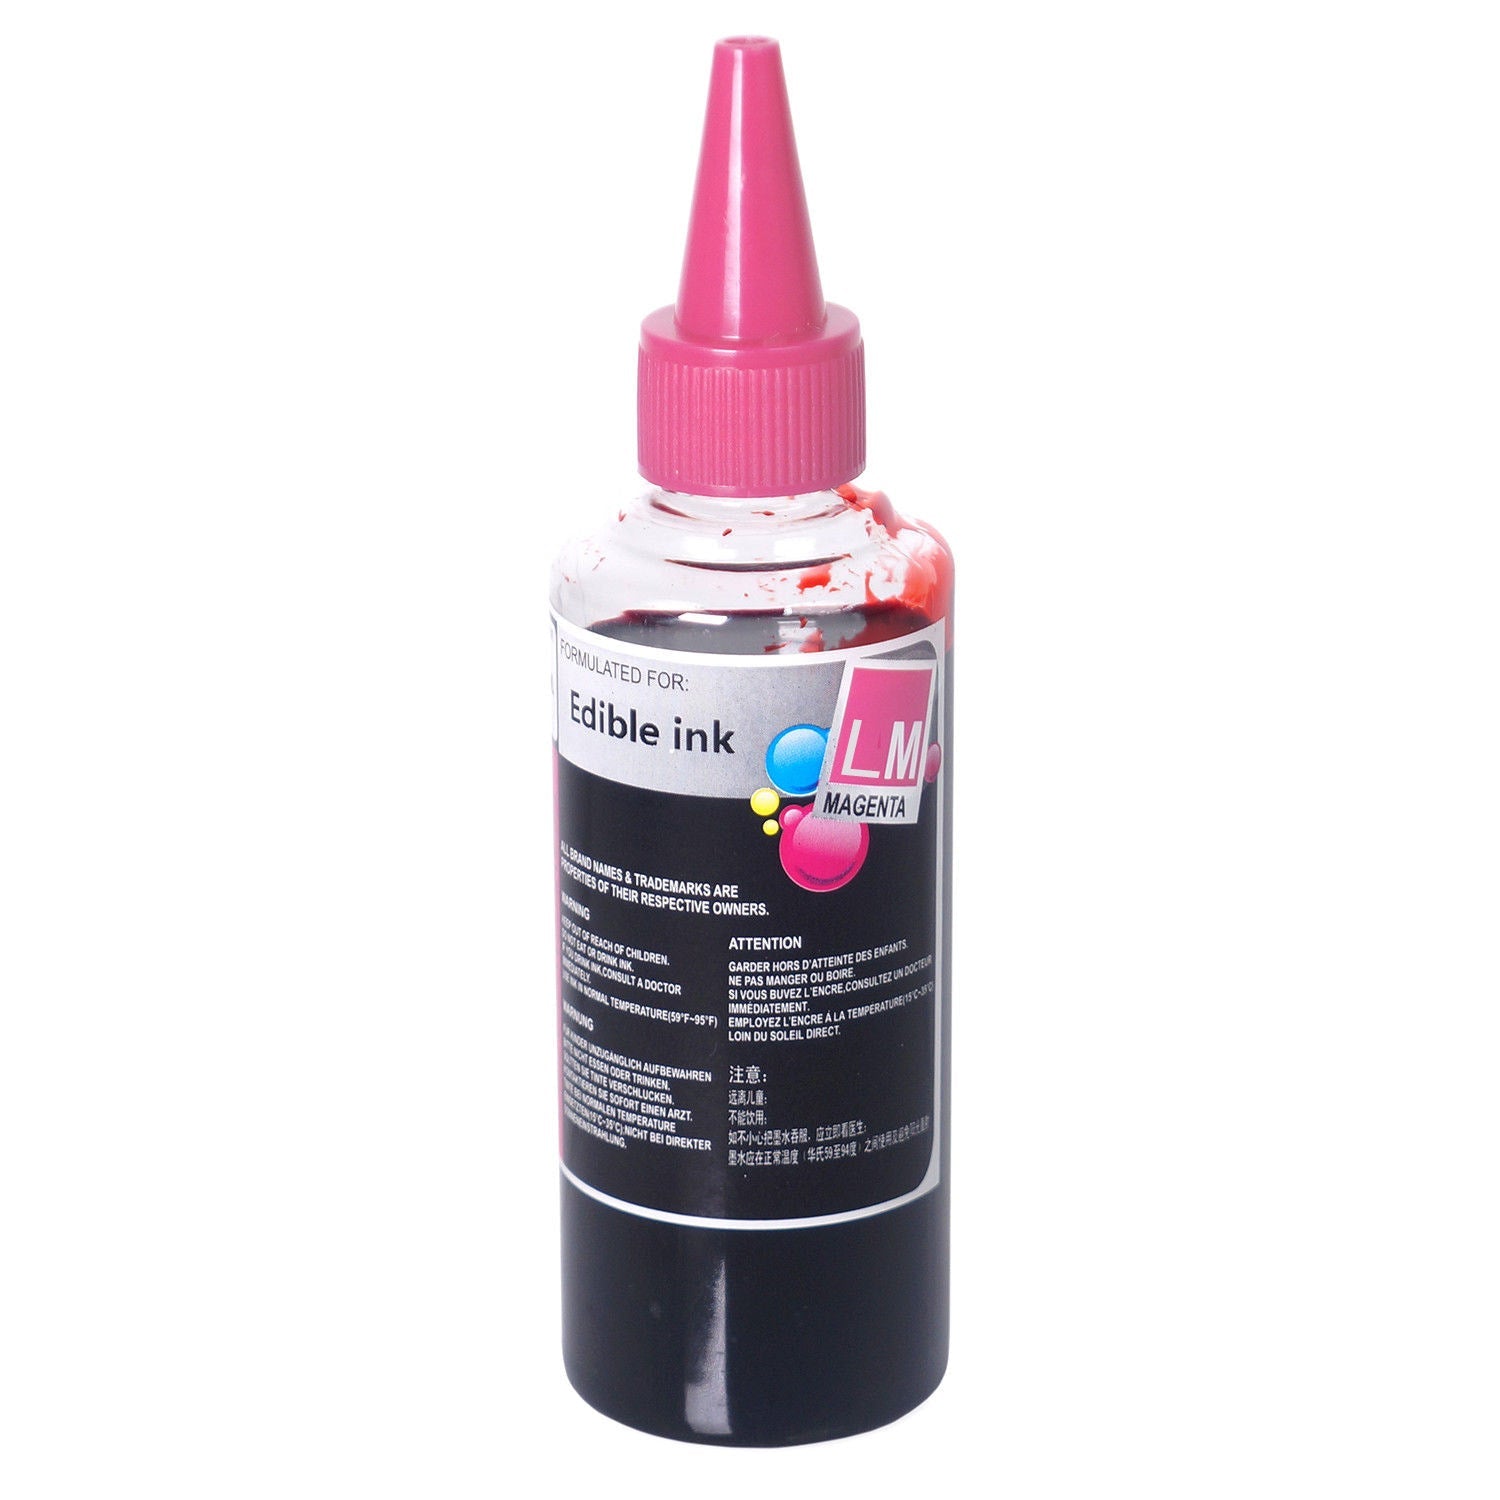 100ml Light Magenta Edible Ink Refill Bottle Compatible for Canon Cartridge